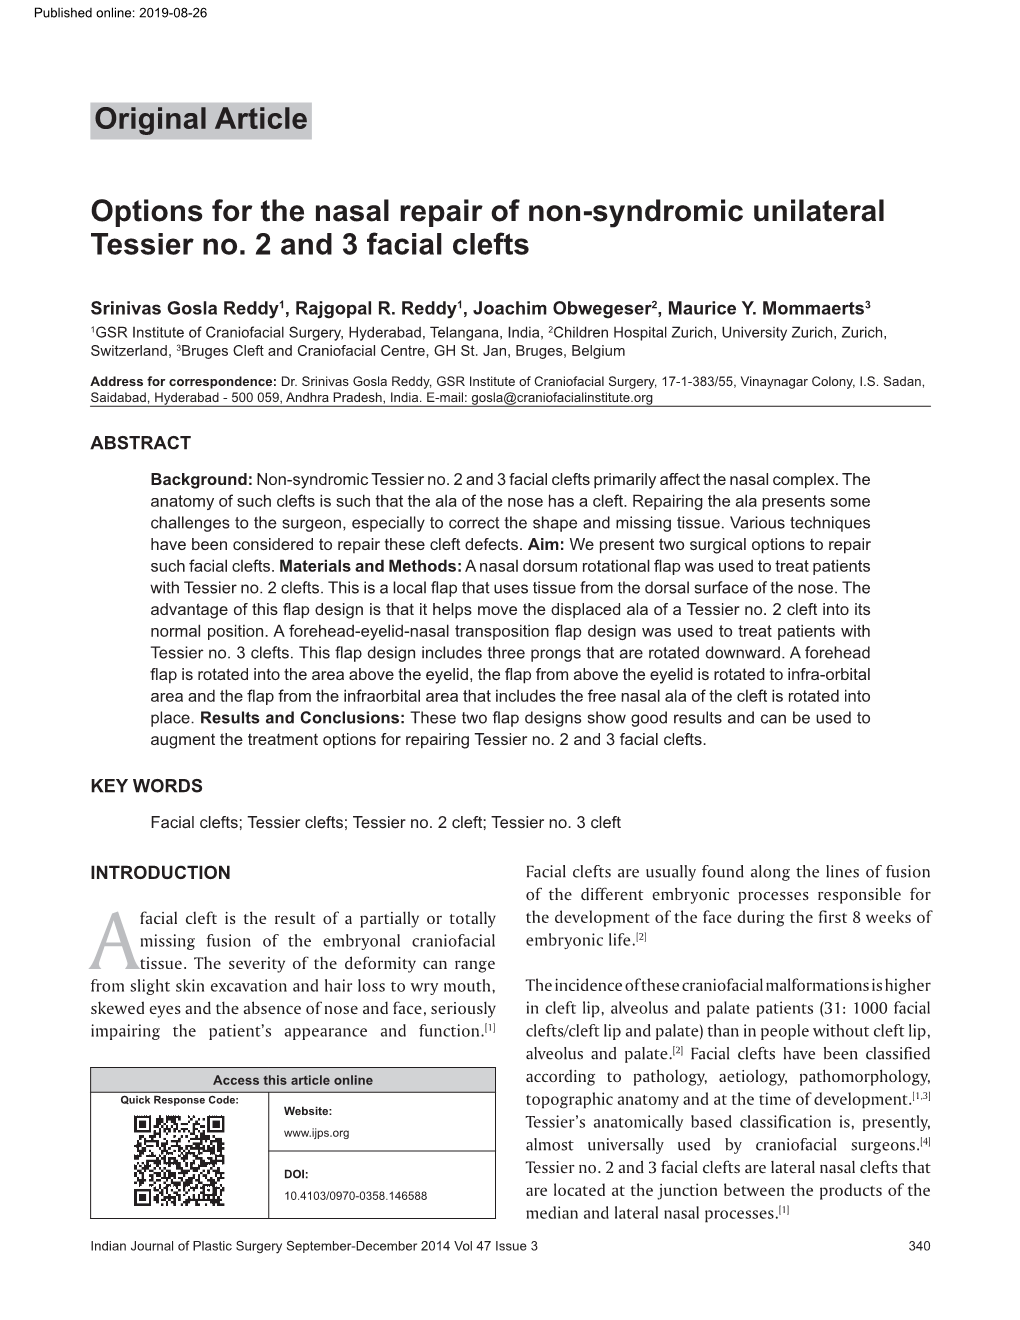 Original Article Options for the Nasal Repair of Non-Syndromic Unilateral